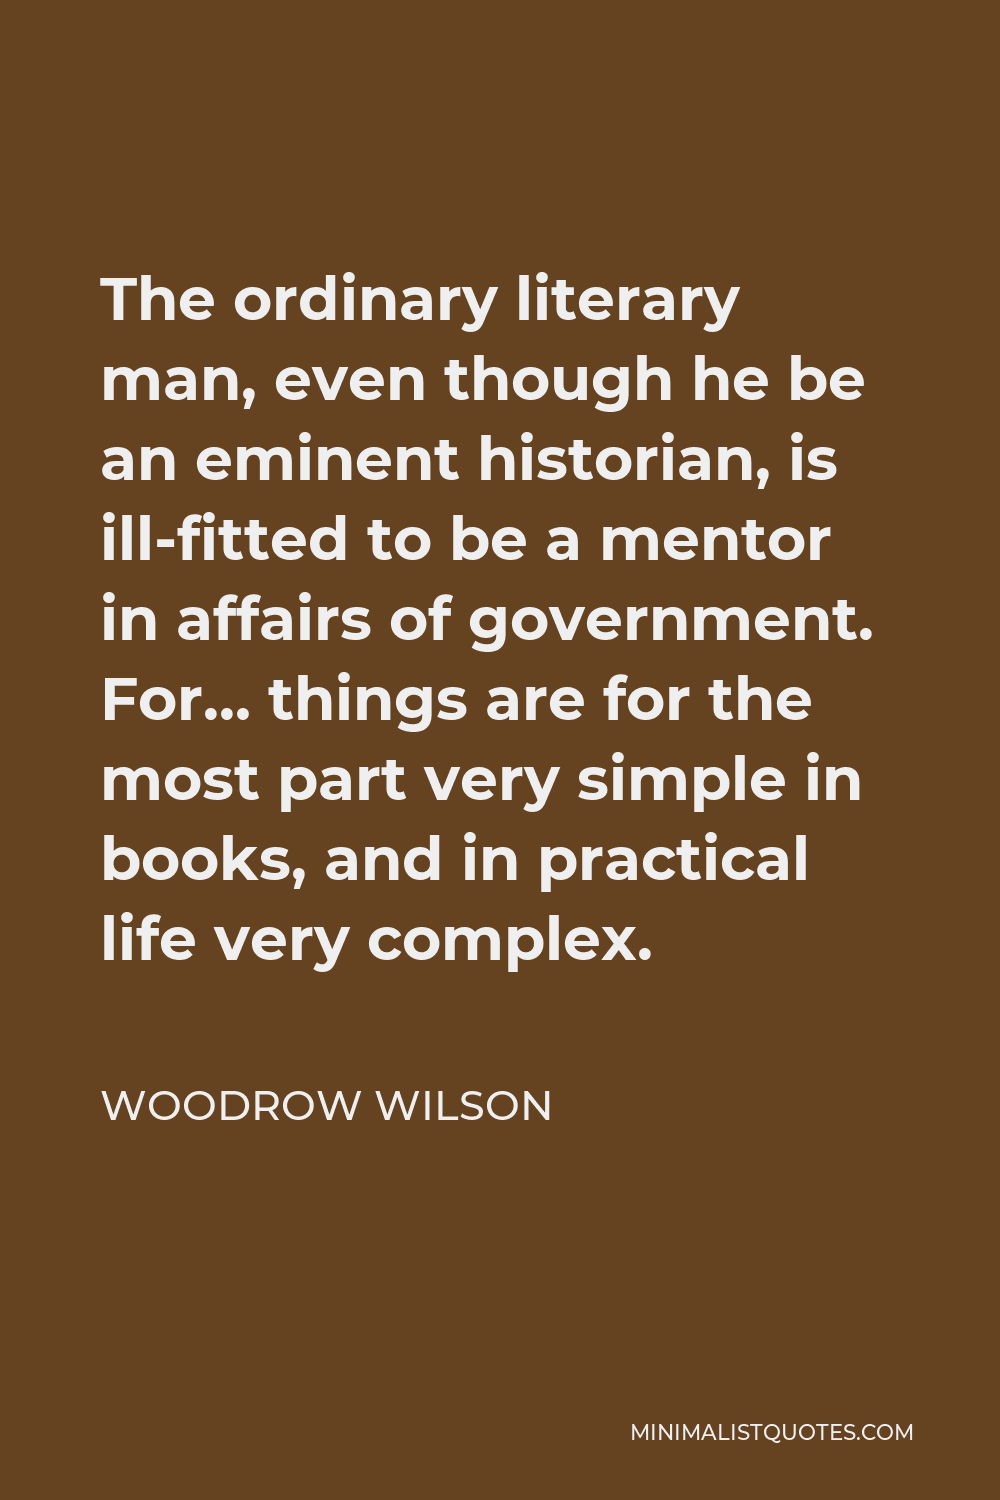 Woodrow Wilson Quote - The ordinary literary man, even though he be an eminent historian, is ill-fitted to be a mentor in affairs of government. For… things are for the most part very simple in books, and in practical life very complex.